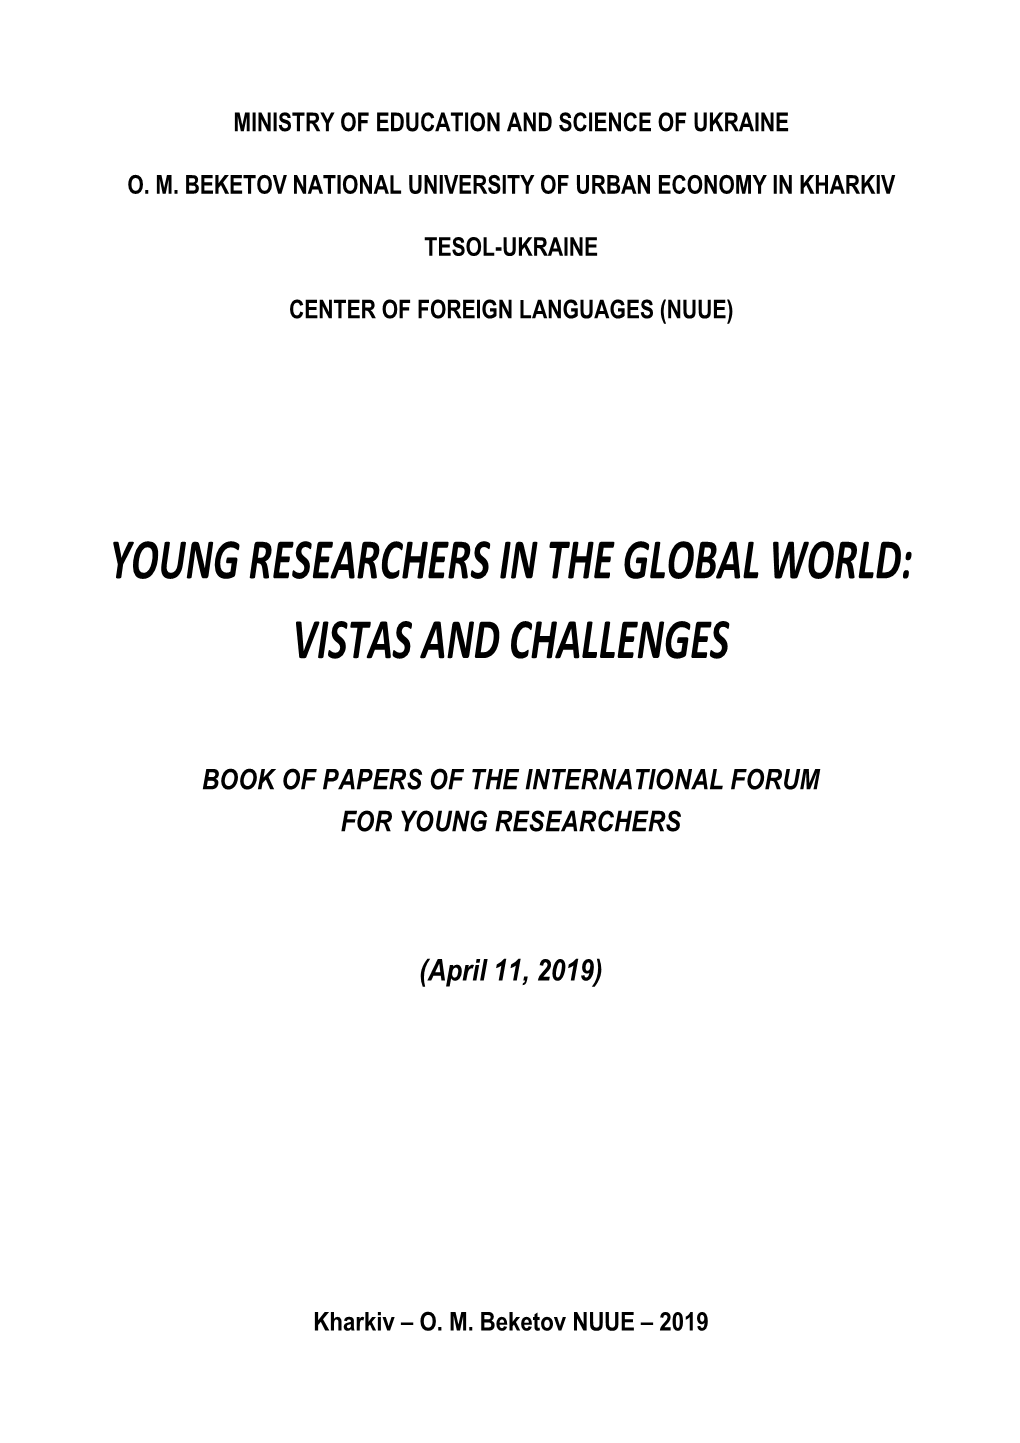 Young Researchers in the Global World: Vistas and Challenges